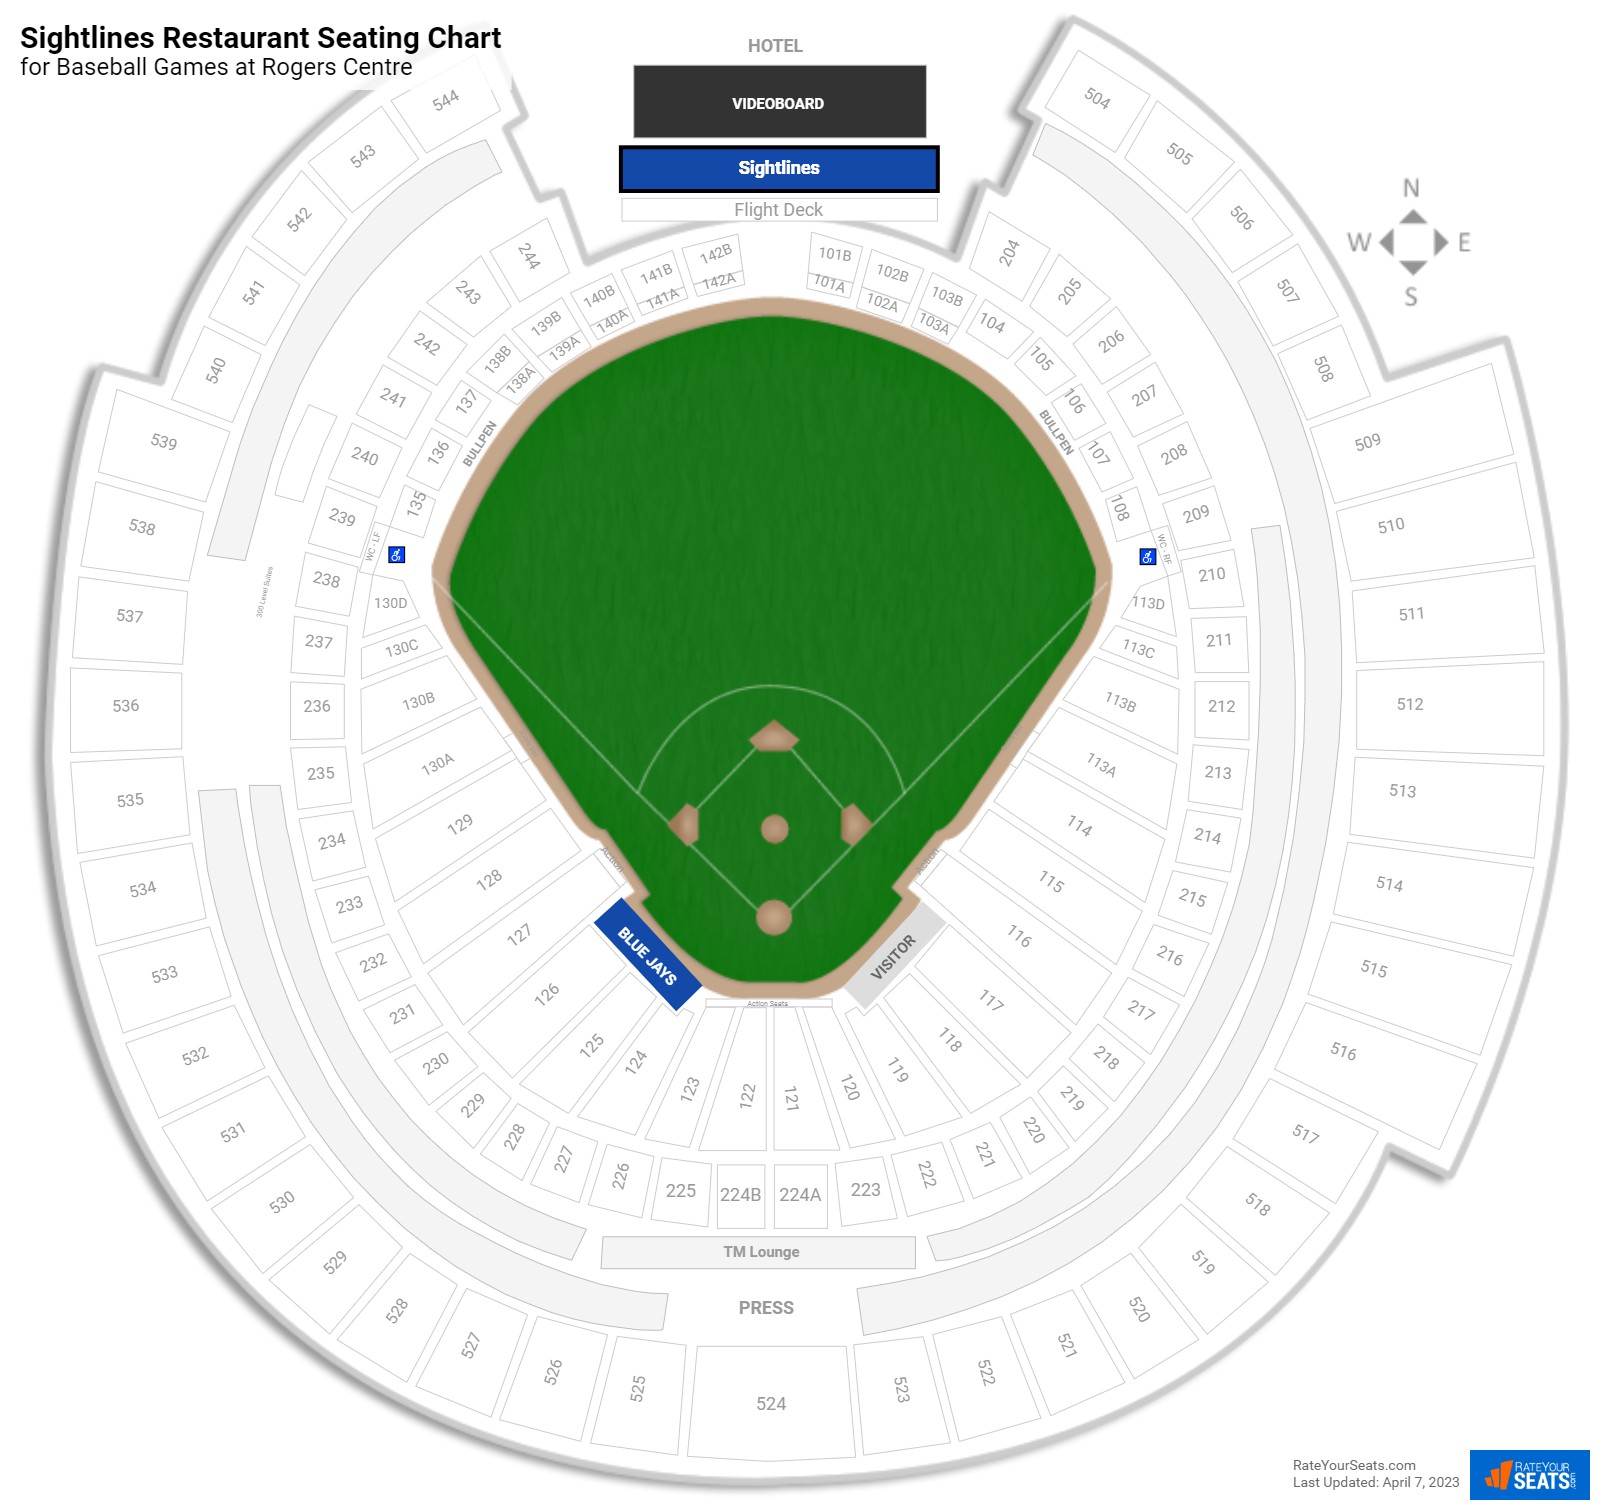 Baseball Sightlines Restaurant Seating Chart at Rogers Centre